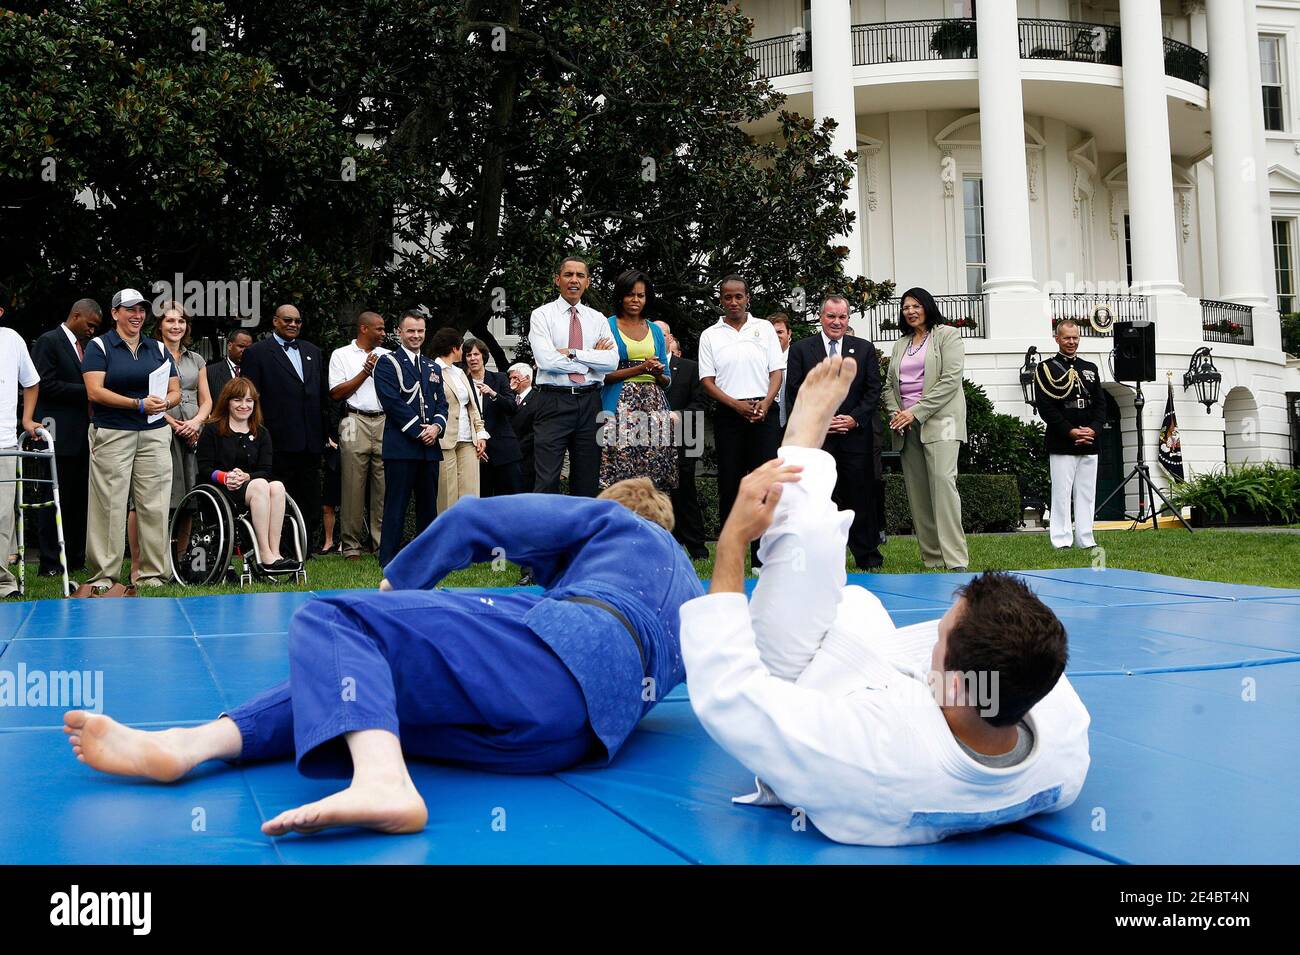 President Barack Obama and his wife Michelle watch a demonstration of judo during an event on Olympics, Paralympics and Youth Sport Canadian on the South Lawn of the White House, Washington, DC,